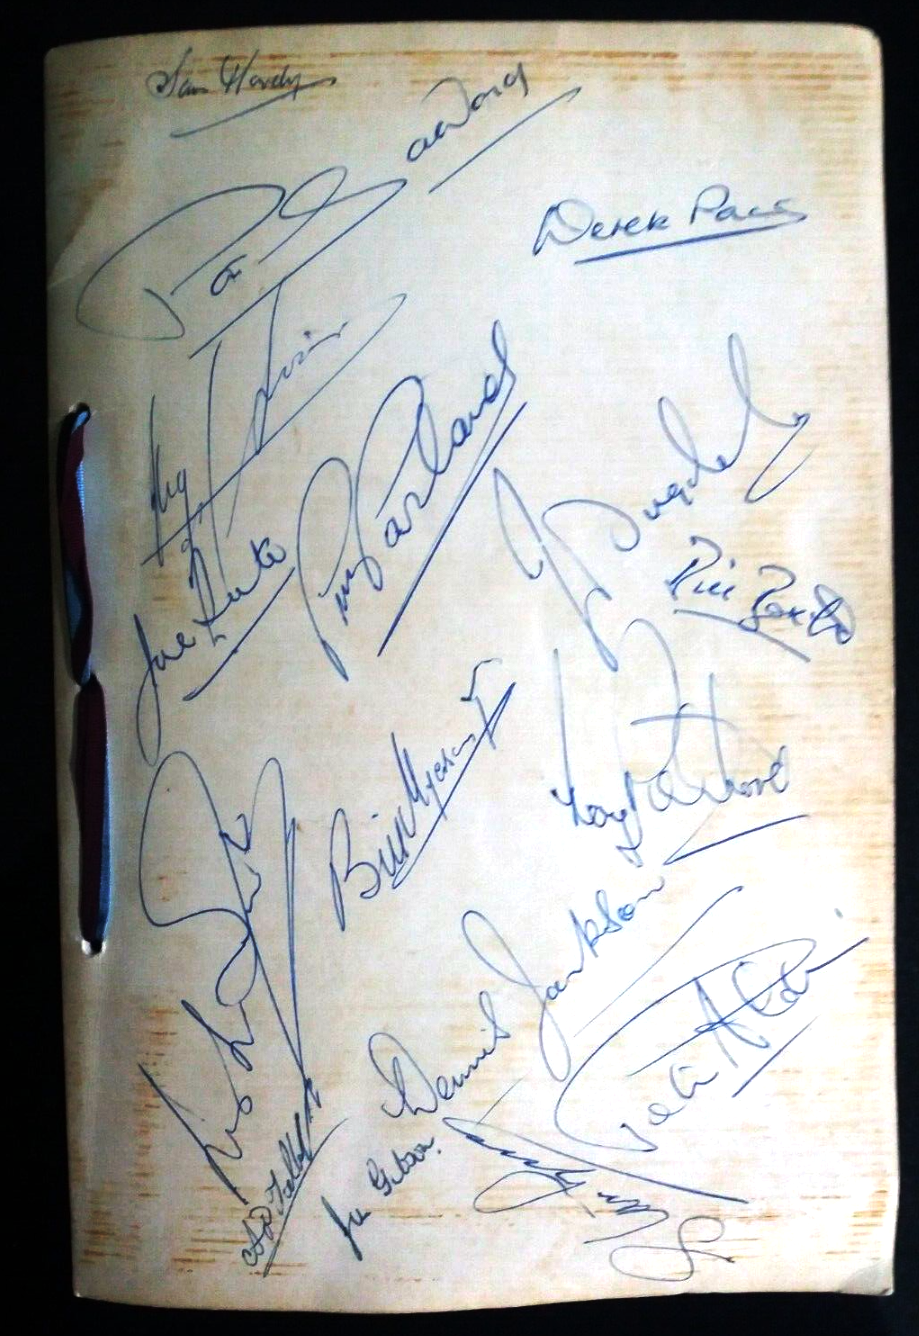 ASTON VILLA 1957 FA CUP FINAL WINNERS MENU.SIGNED BY 30 ViLLA PLAYERS 1890'S TO 1957. - Image 3 of 5